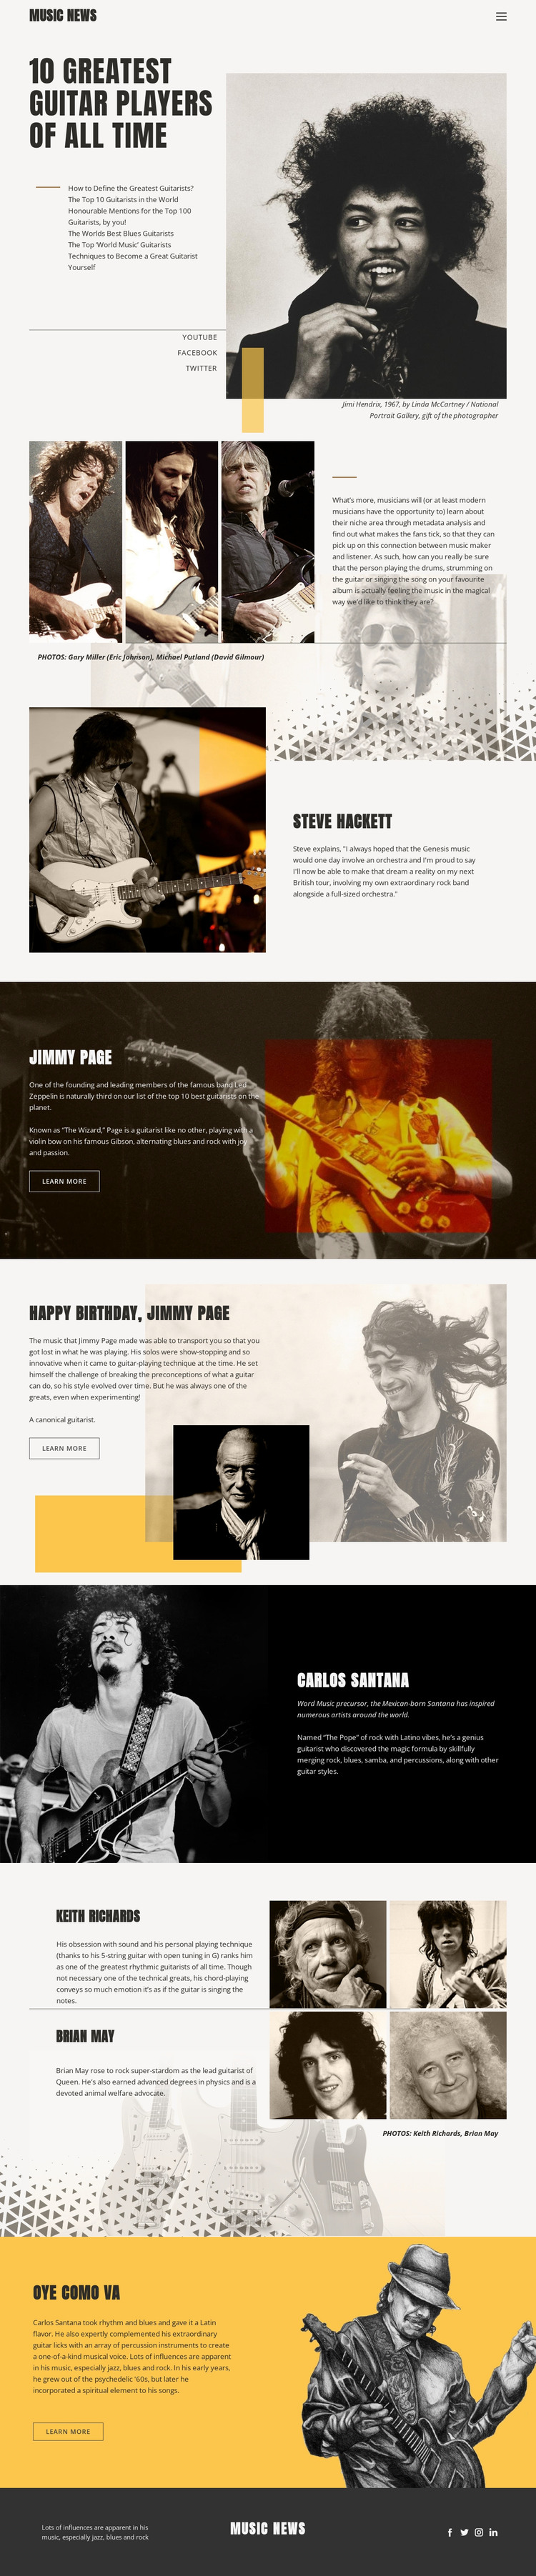 The Top Guitar Players HTML Template